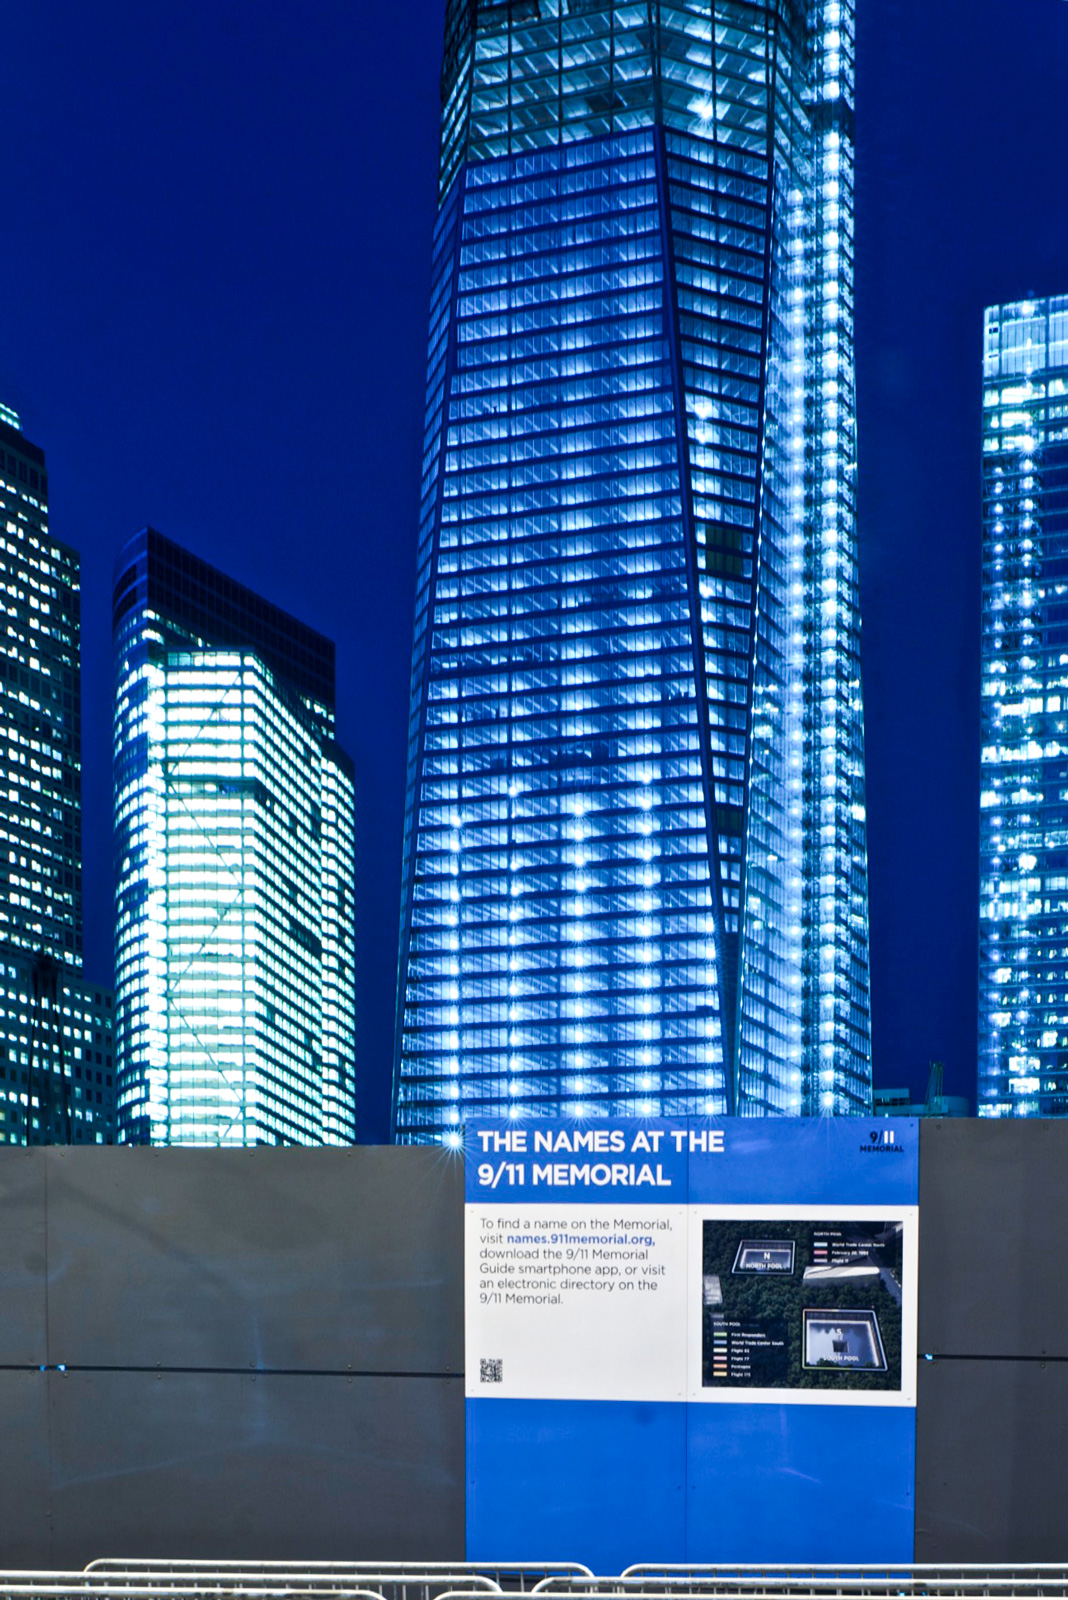 Signage for 9/11 Memorial and Visitor Center